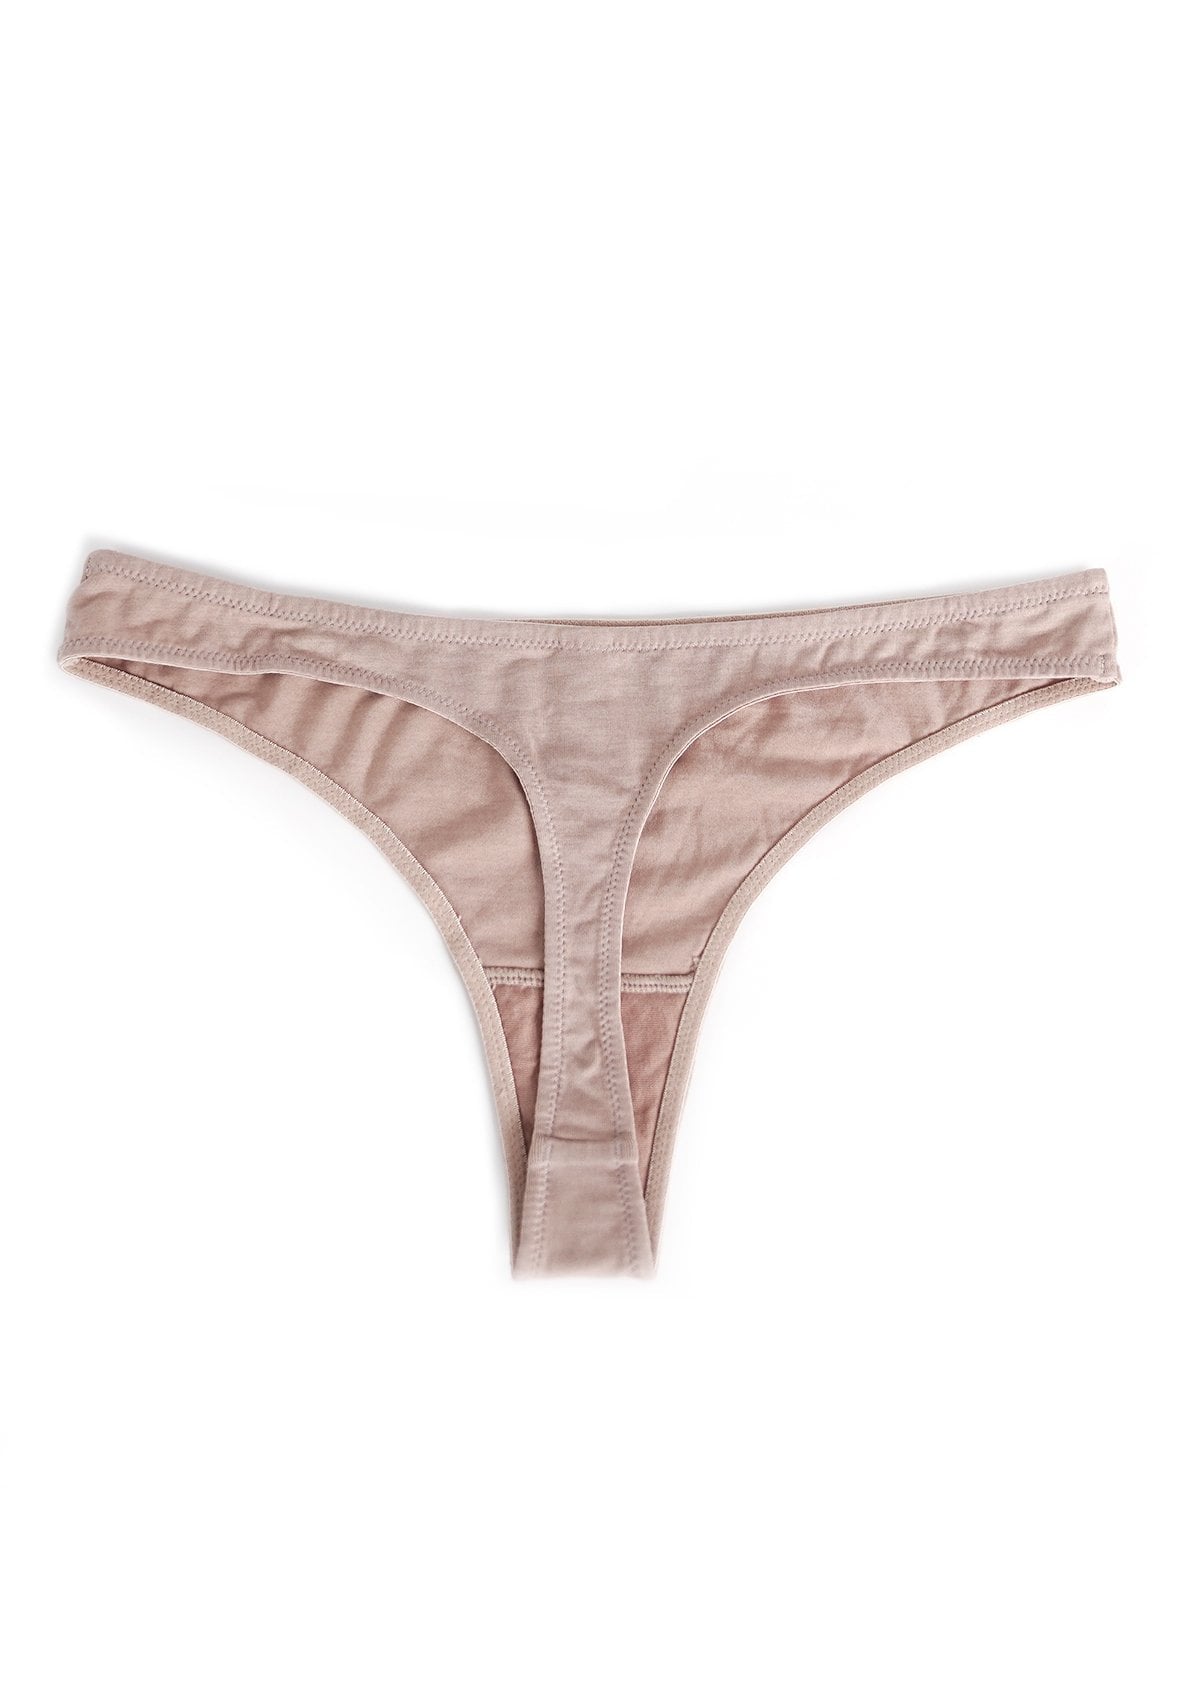 HSIA Comfort Cotton Thongs 3 Pack - M / Beige+Black+Pink